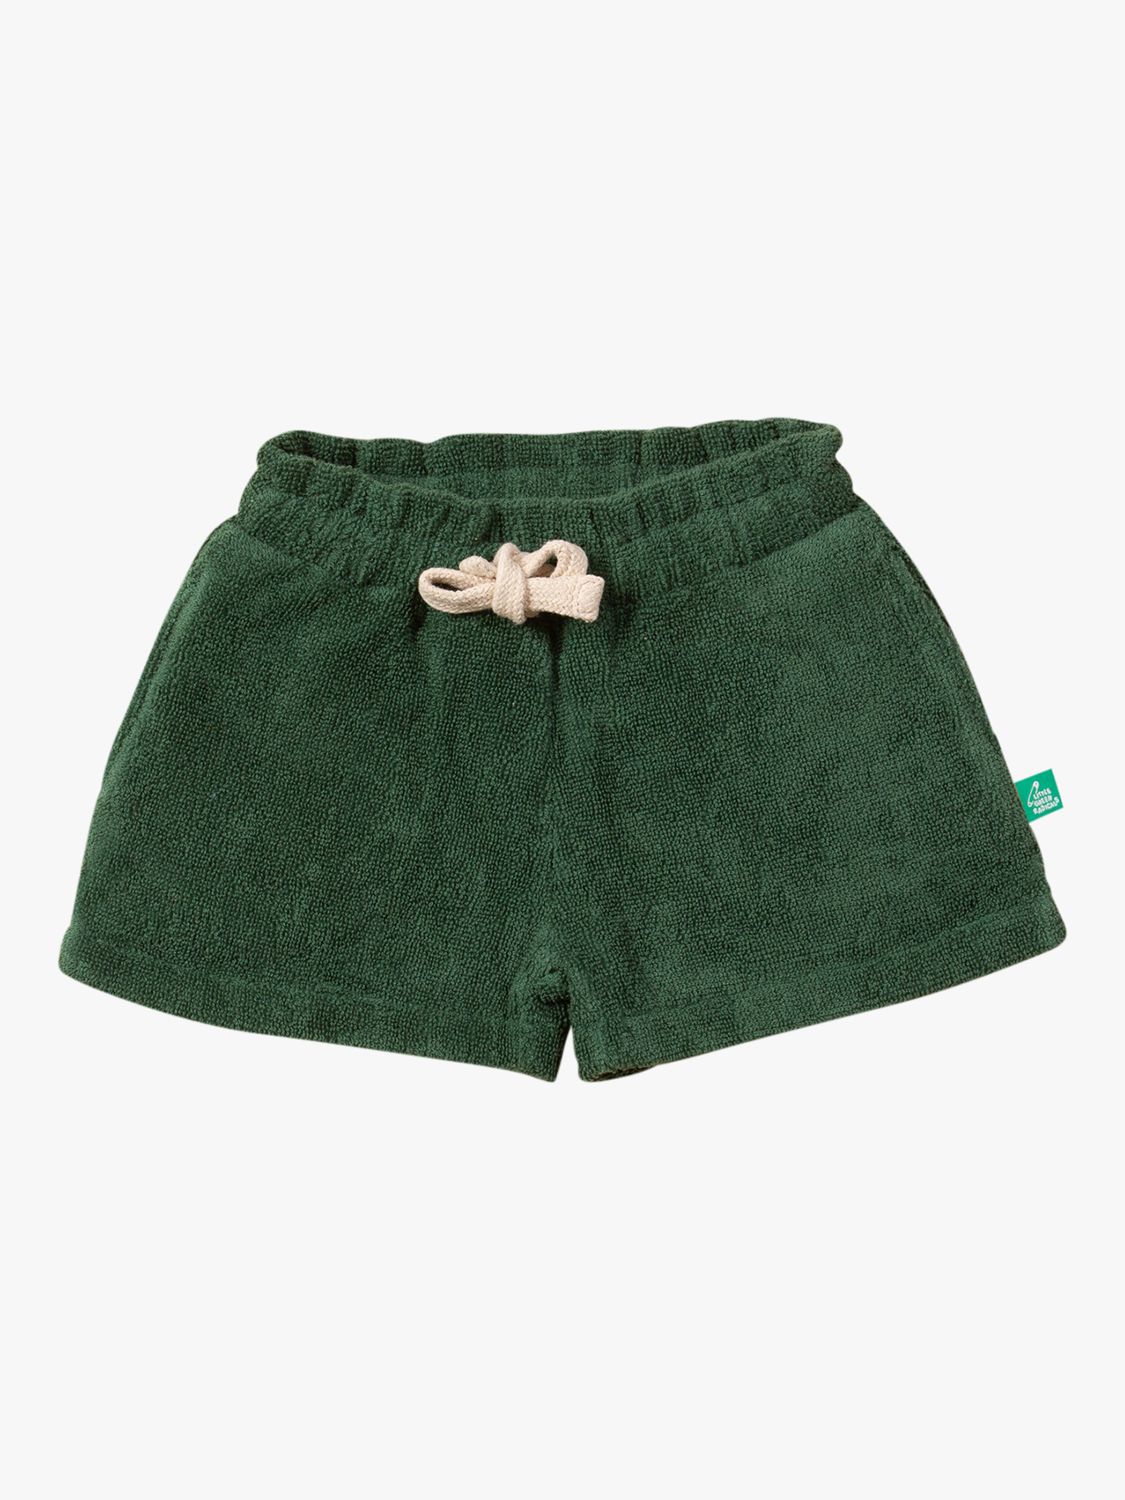 Little Green Radicals Baby Organic Cotton Towelling Shorts, Olive Solid, 6-7 years